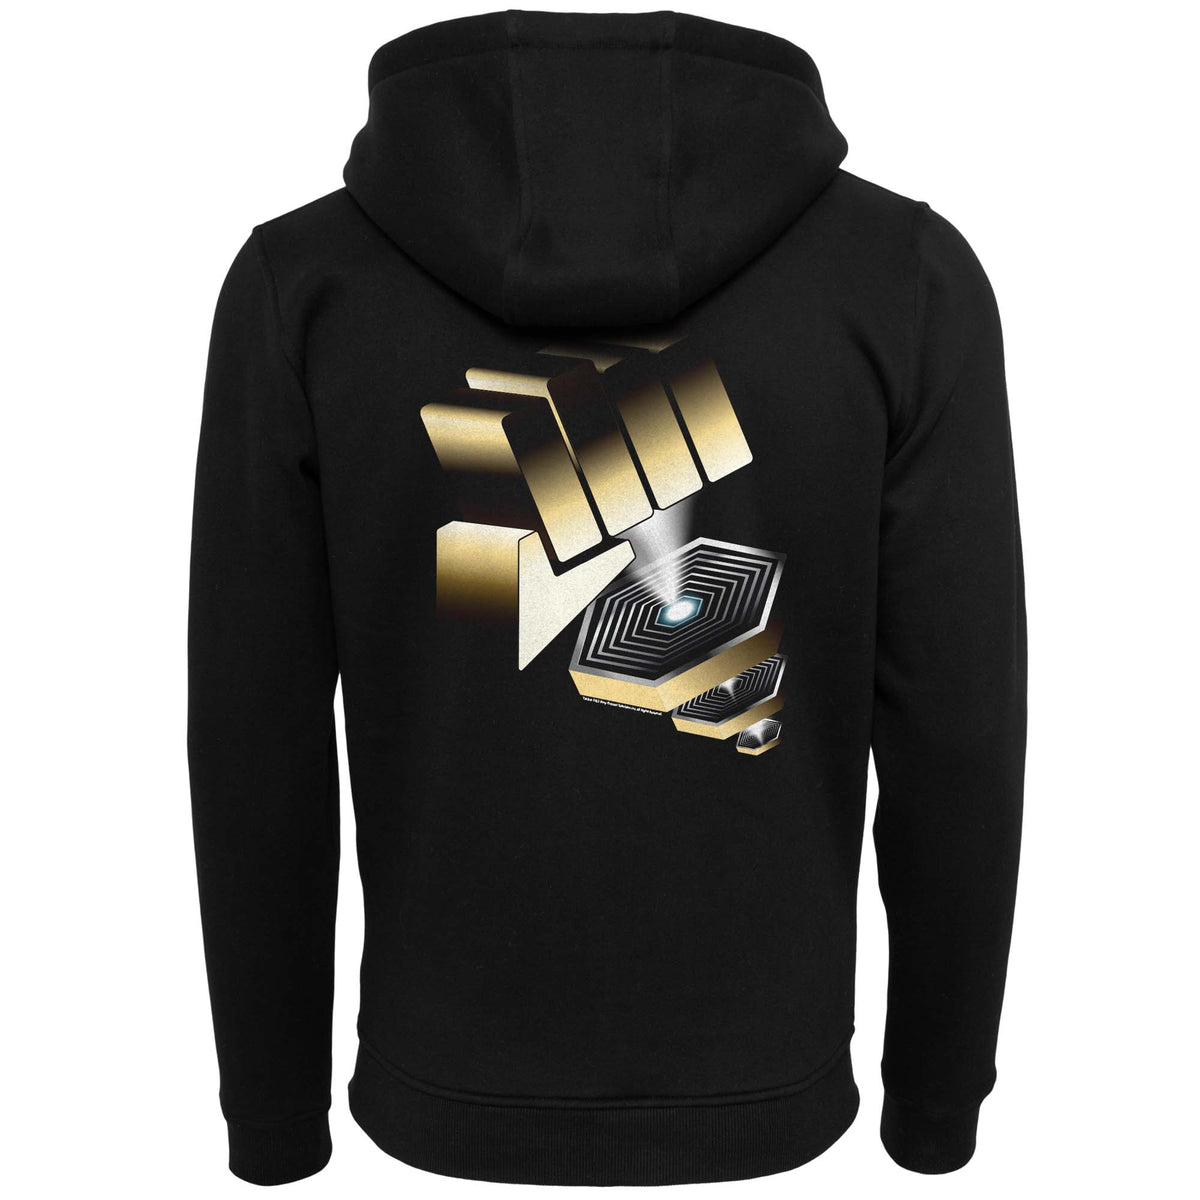 All Valley Championship Black Unisex Zipped Hoodie